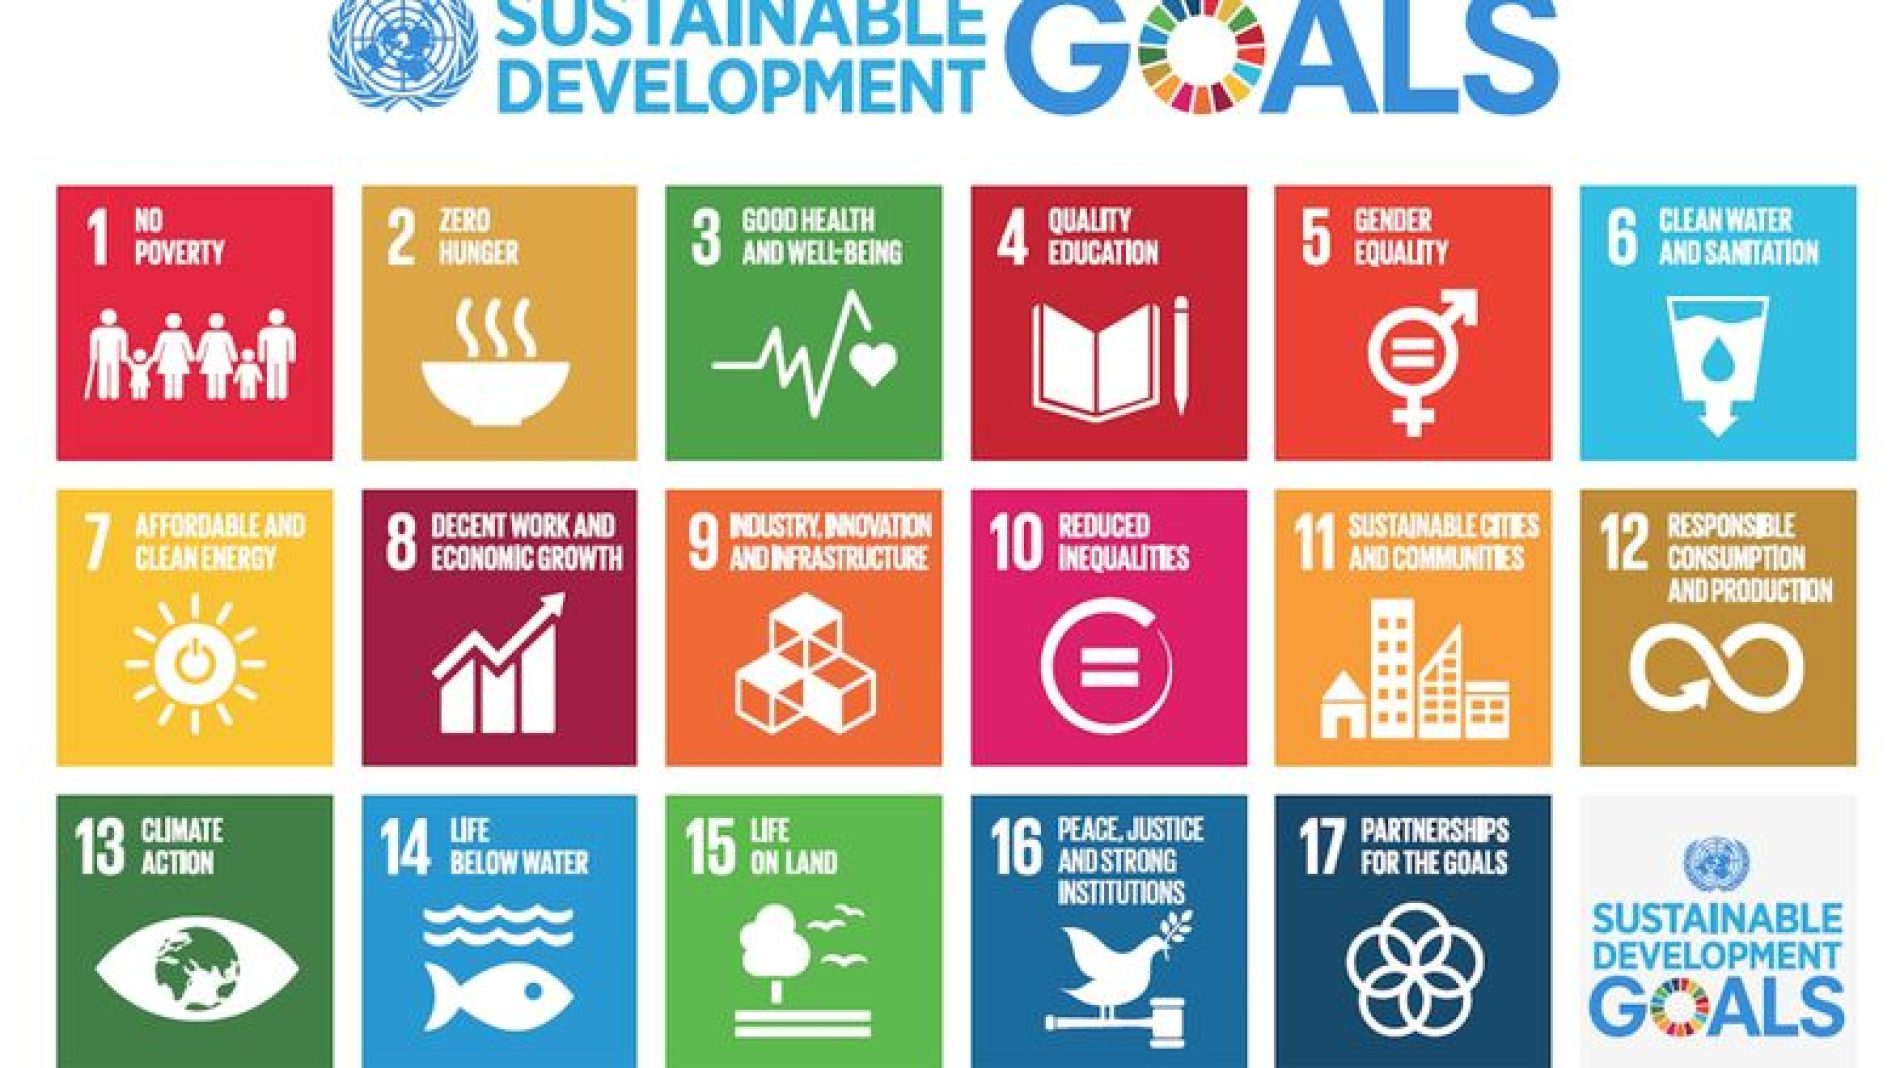 What are the Sustainable Development Goals